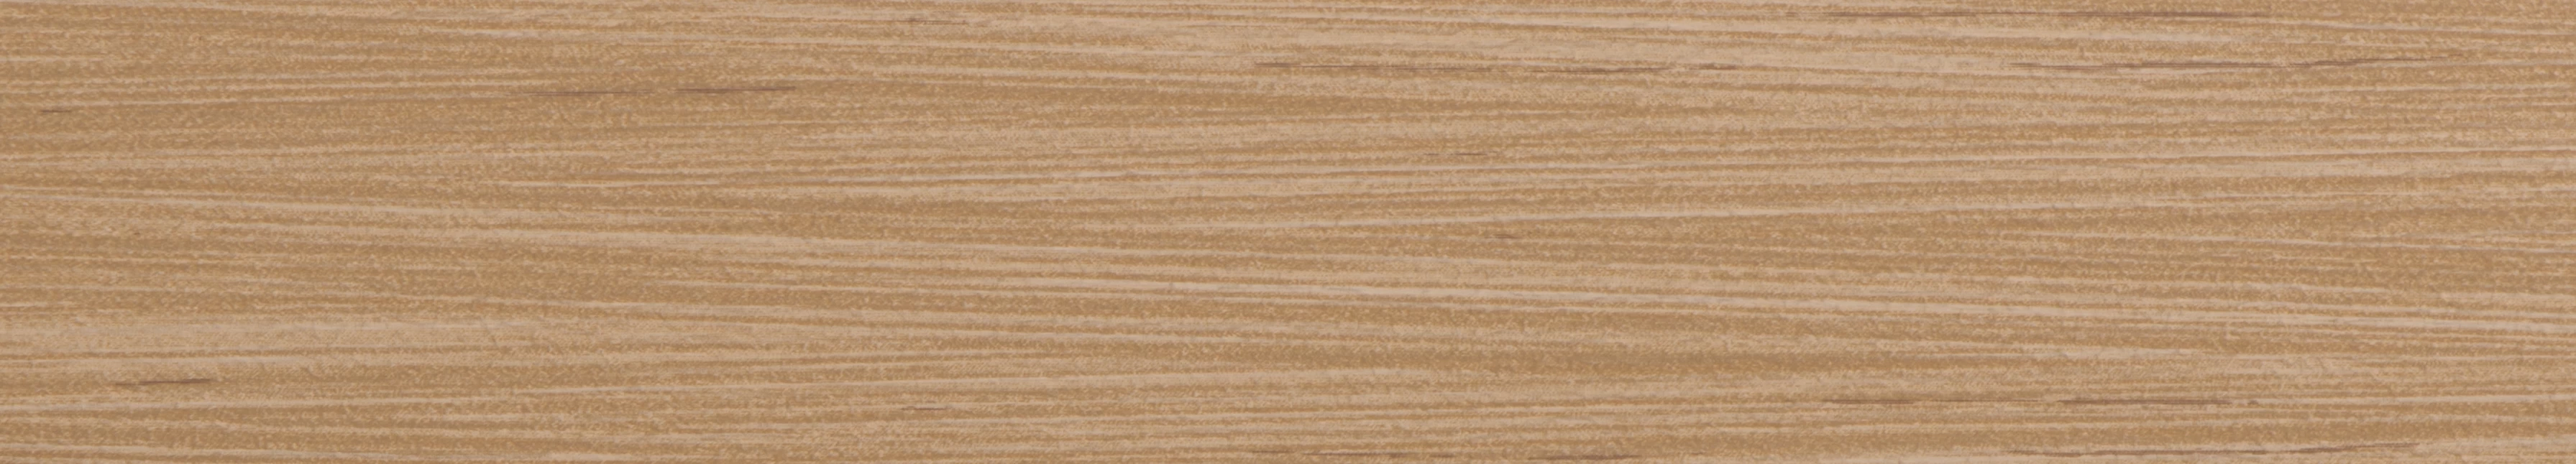 H3730 ST10 NATURAL HICKORY